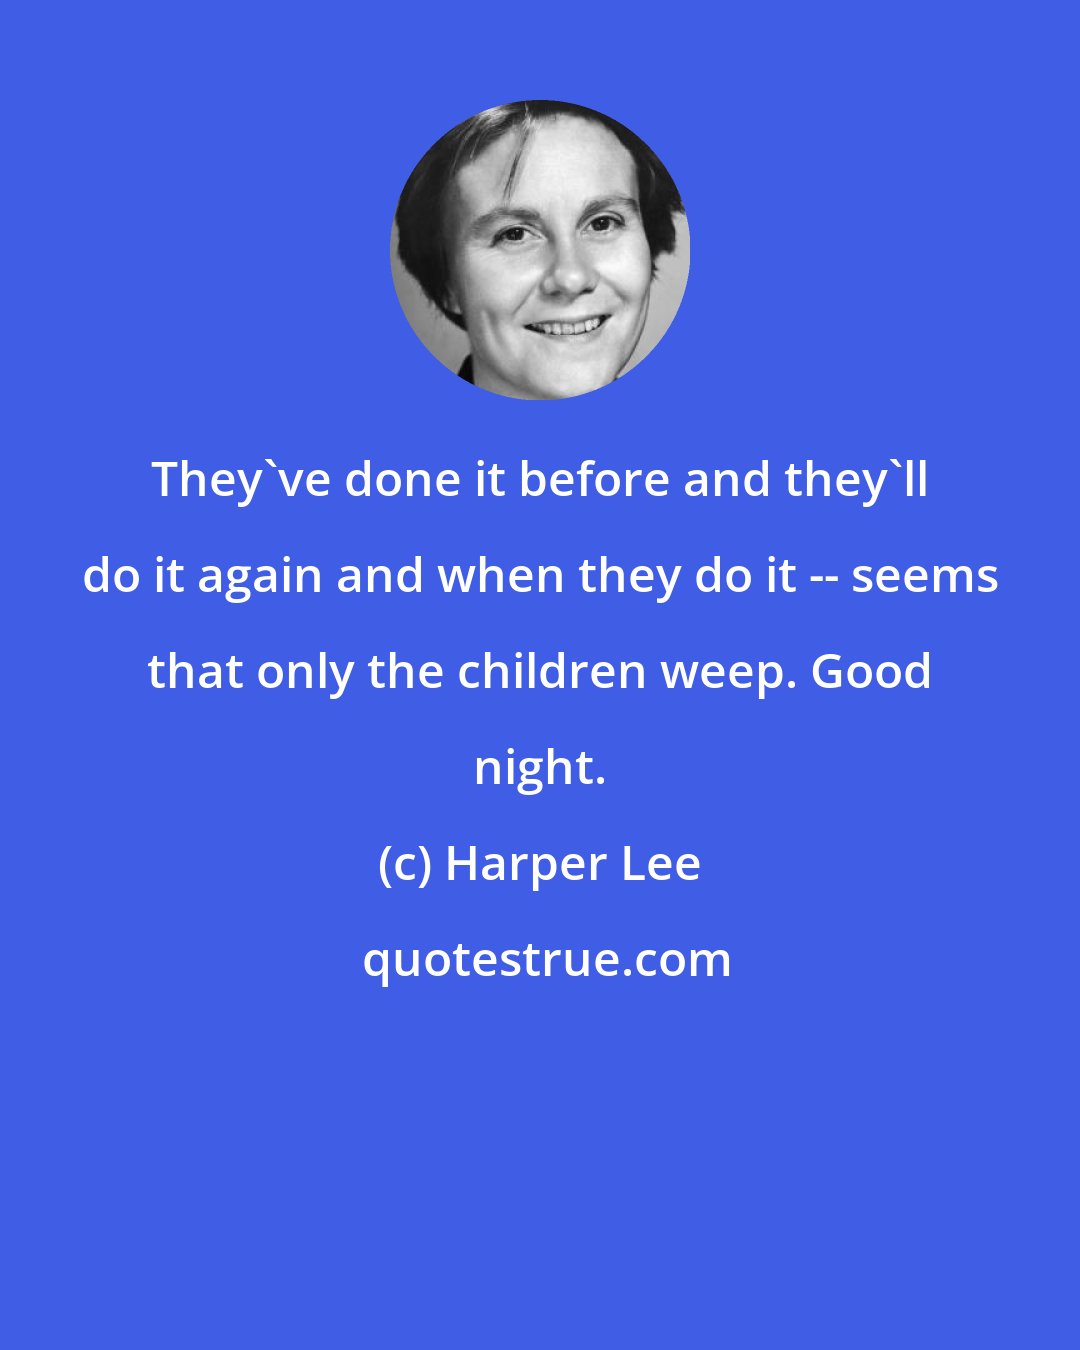 Harper Lee: They've done it before and they'll do it again and when they do it -- seems that only the children weep. Good night.